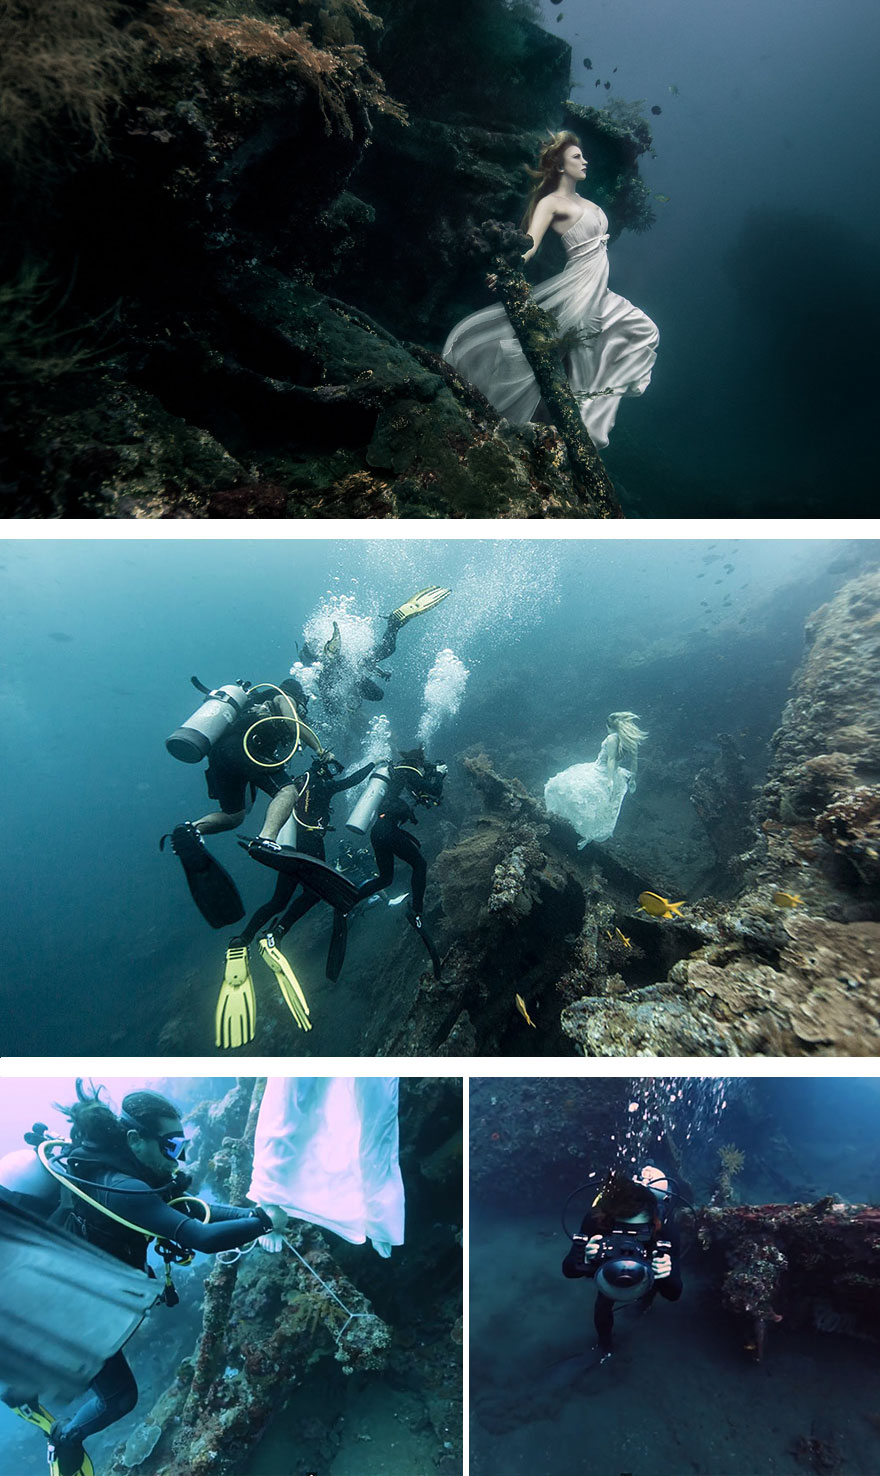 Photoshoot 25m Under The Sea In A Sunken Shipwreck